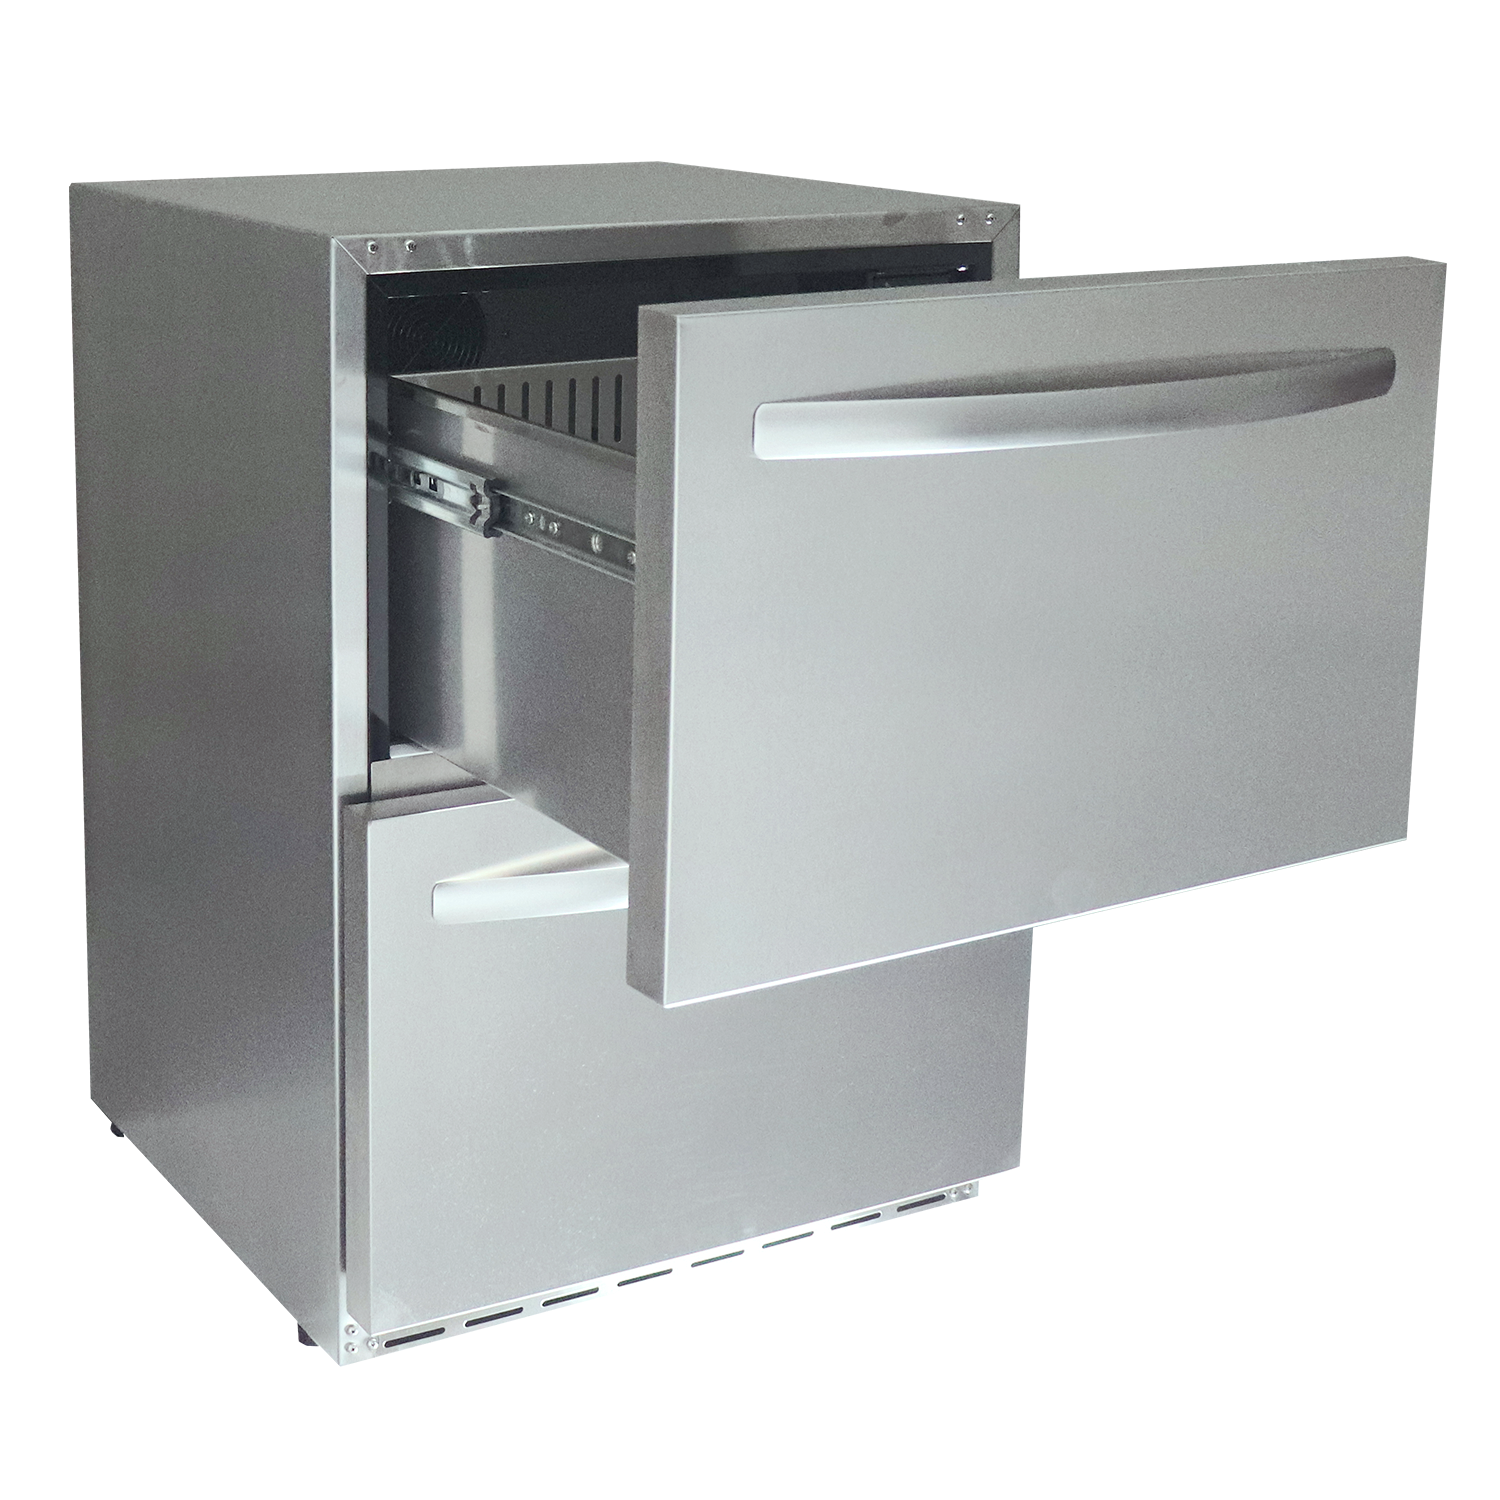 Stainless Two Drawer Refrigerator - UL Rated